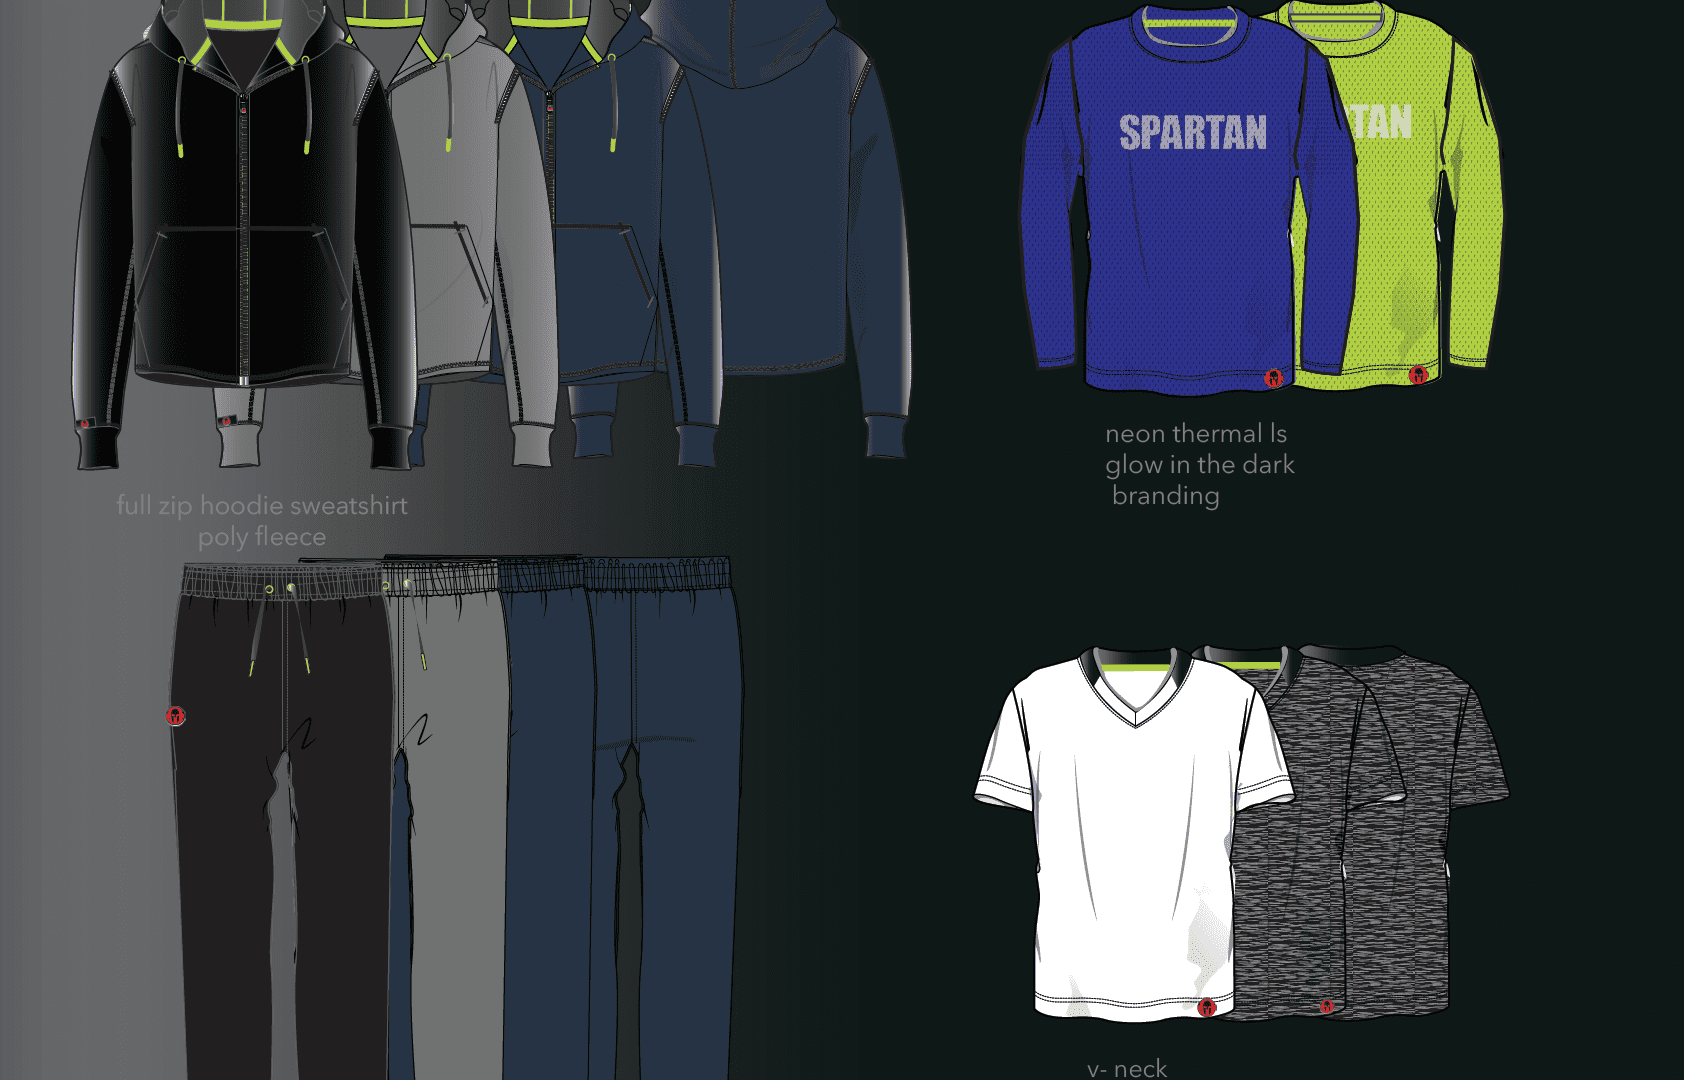 A series of images showing different types of clothing.